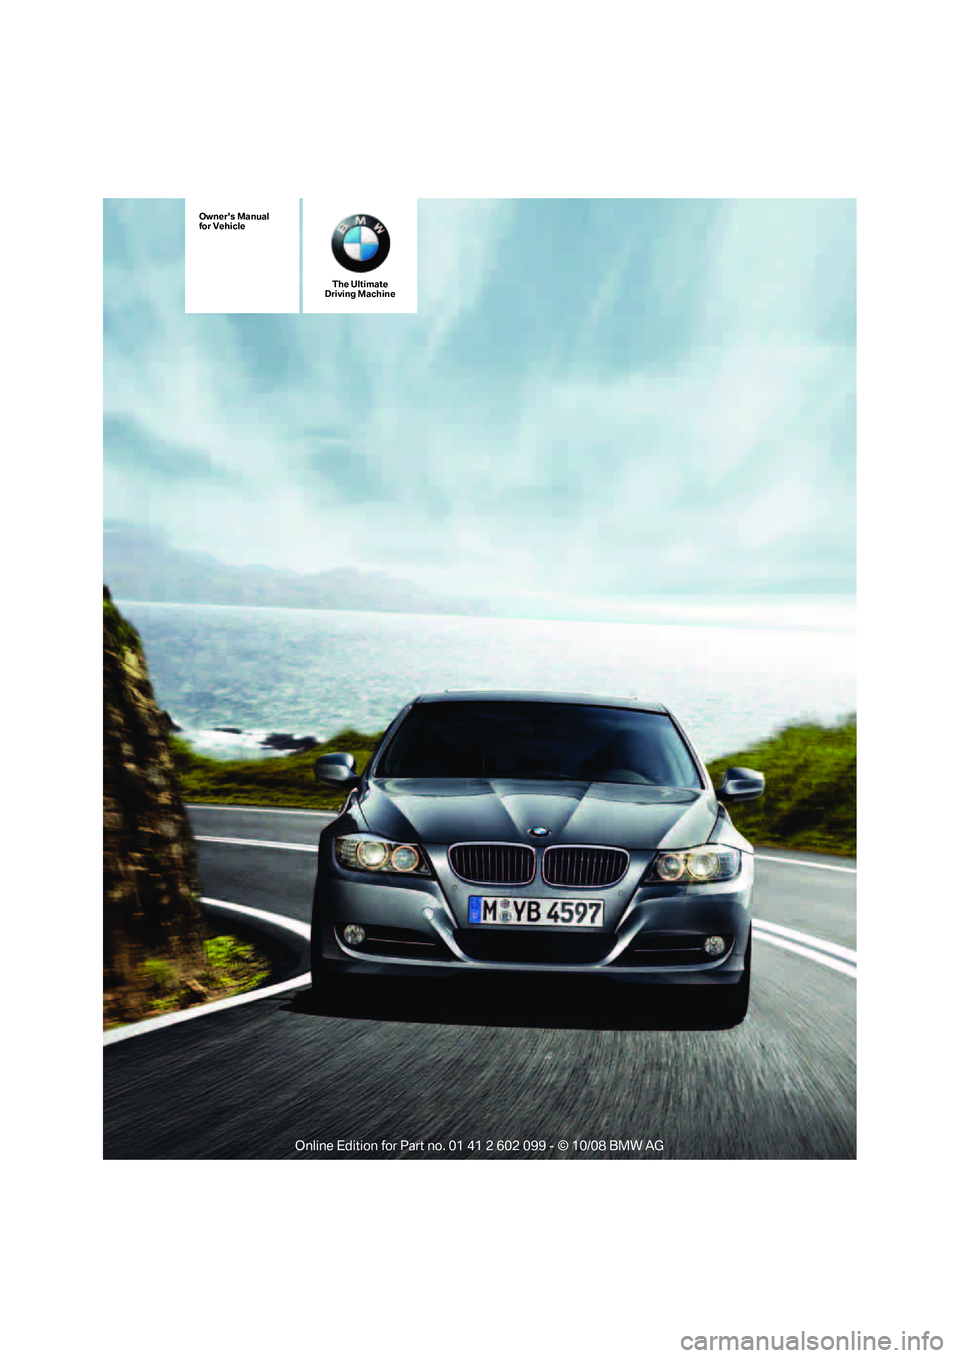 BMW 335I XDRIVE 2009  Owners Manual The Ultimate
Driving Machine
Owners Manual
for Vehicle
ba8_E9091_cic.book  Seite 1  Mittwoch, 29. Oktober 2008  2:59 14 